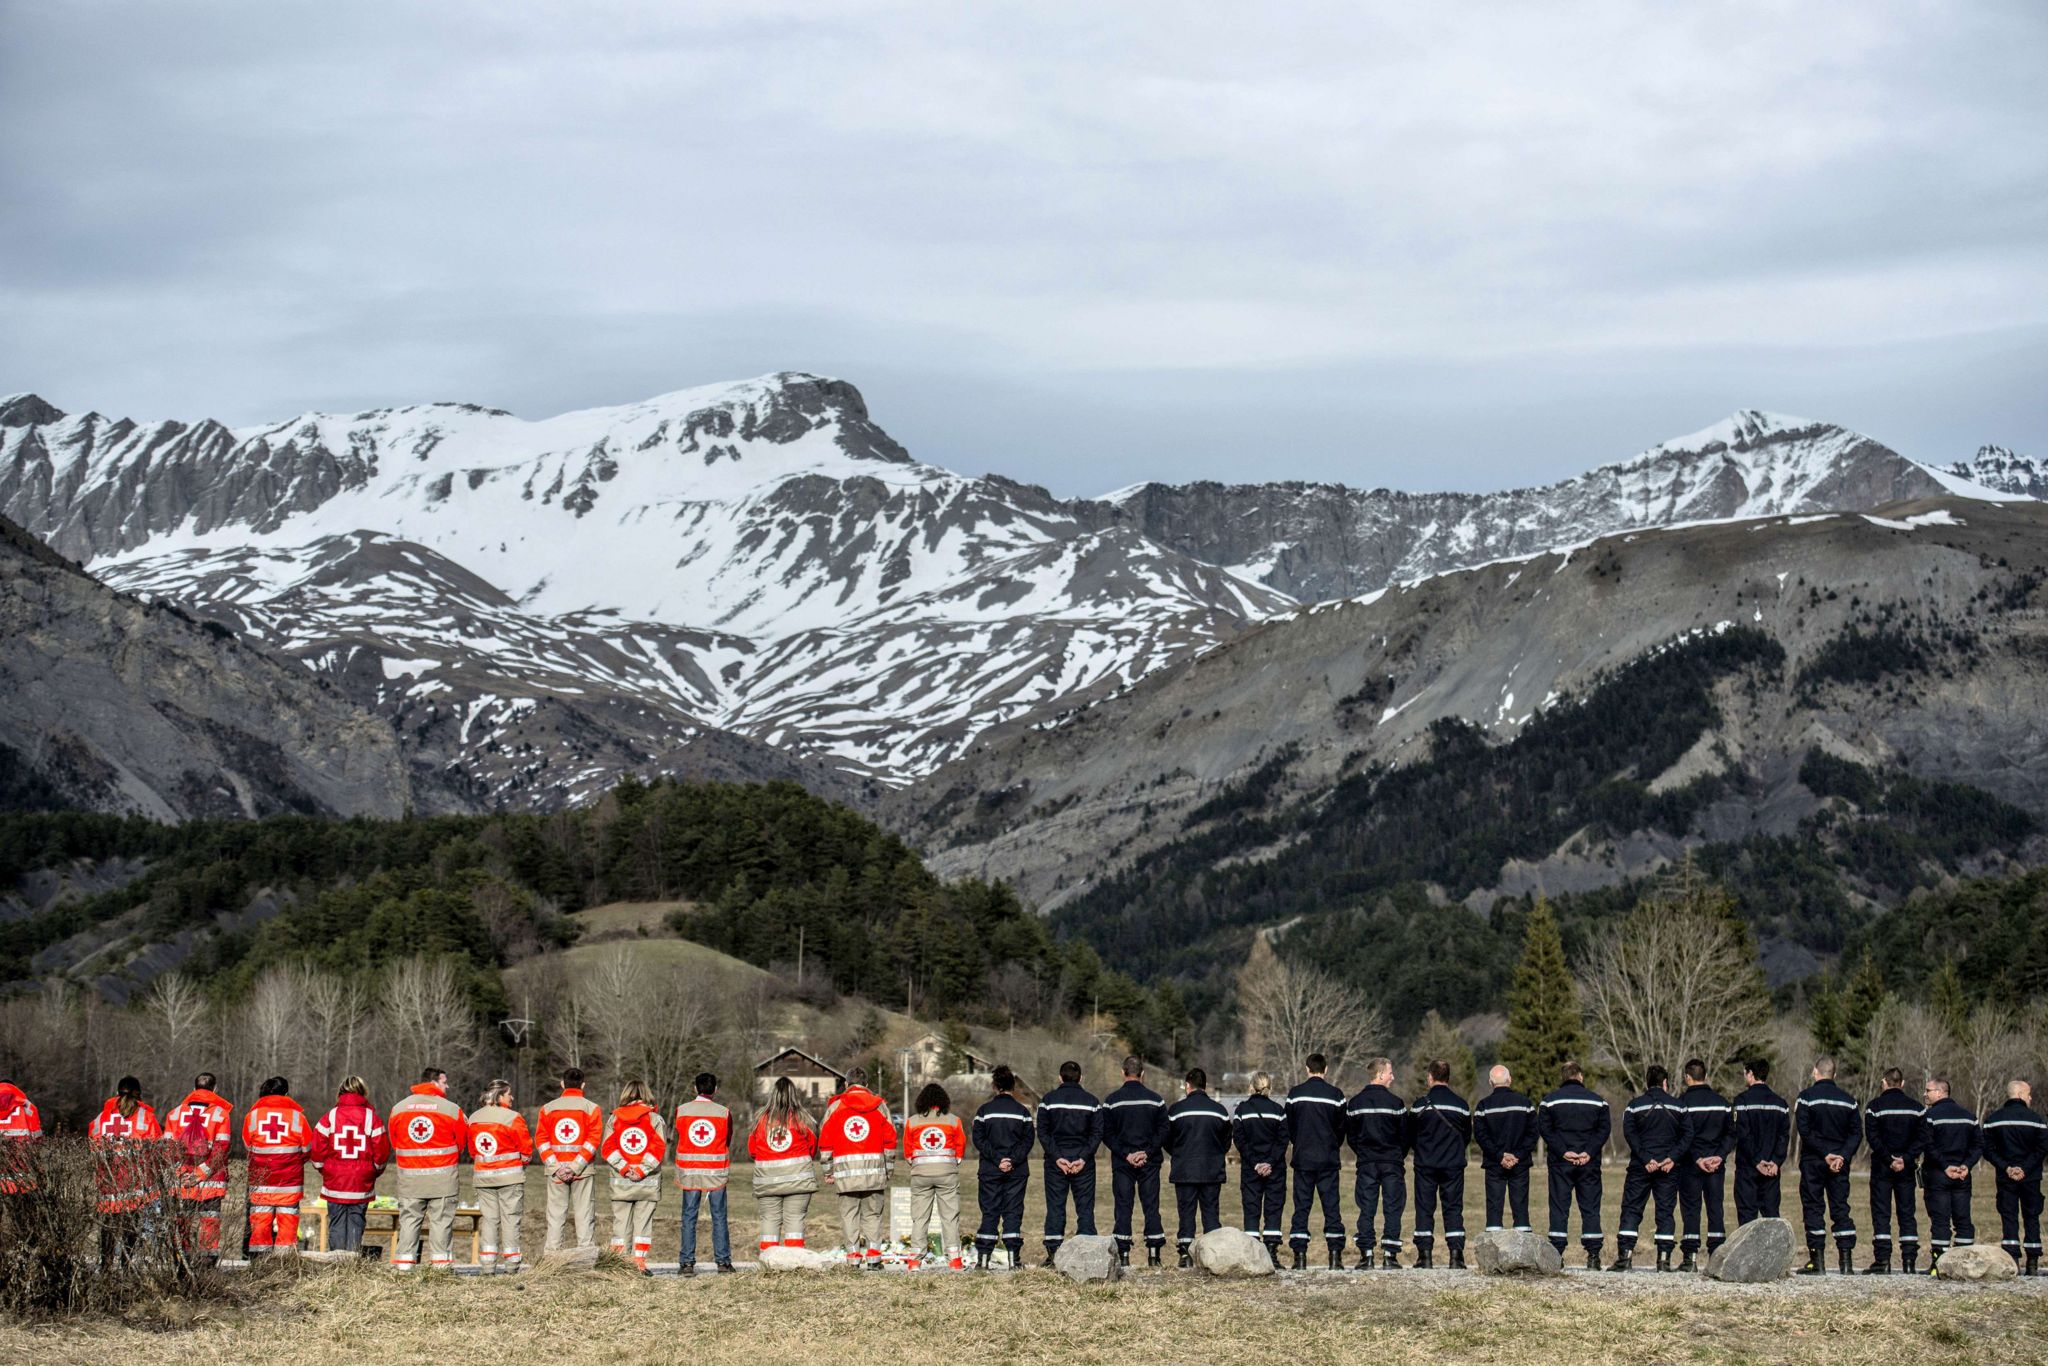 French rescue workers gather in front of a memorial for the victims of the Germanwings air crash in Le Vernet, south-eastern France, on March 28, 2015